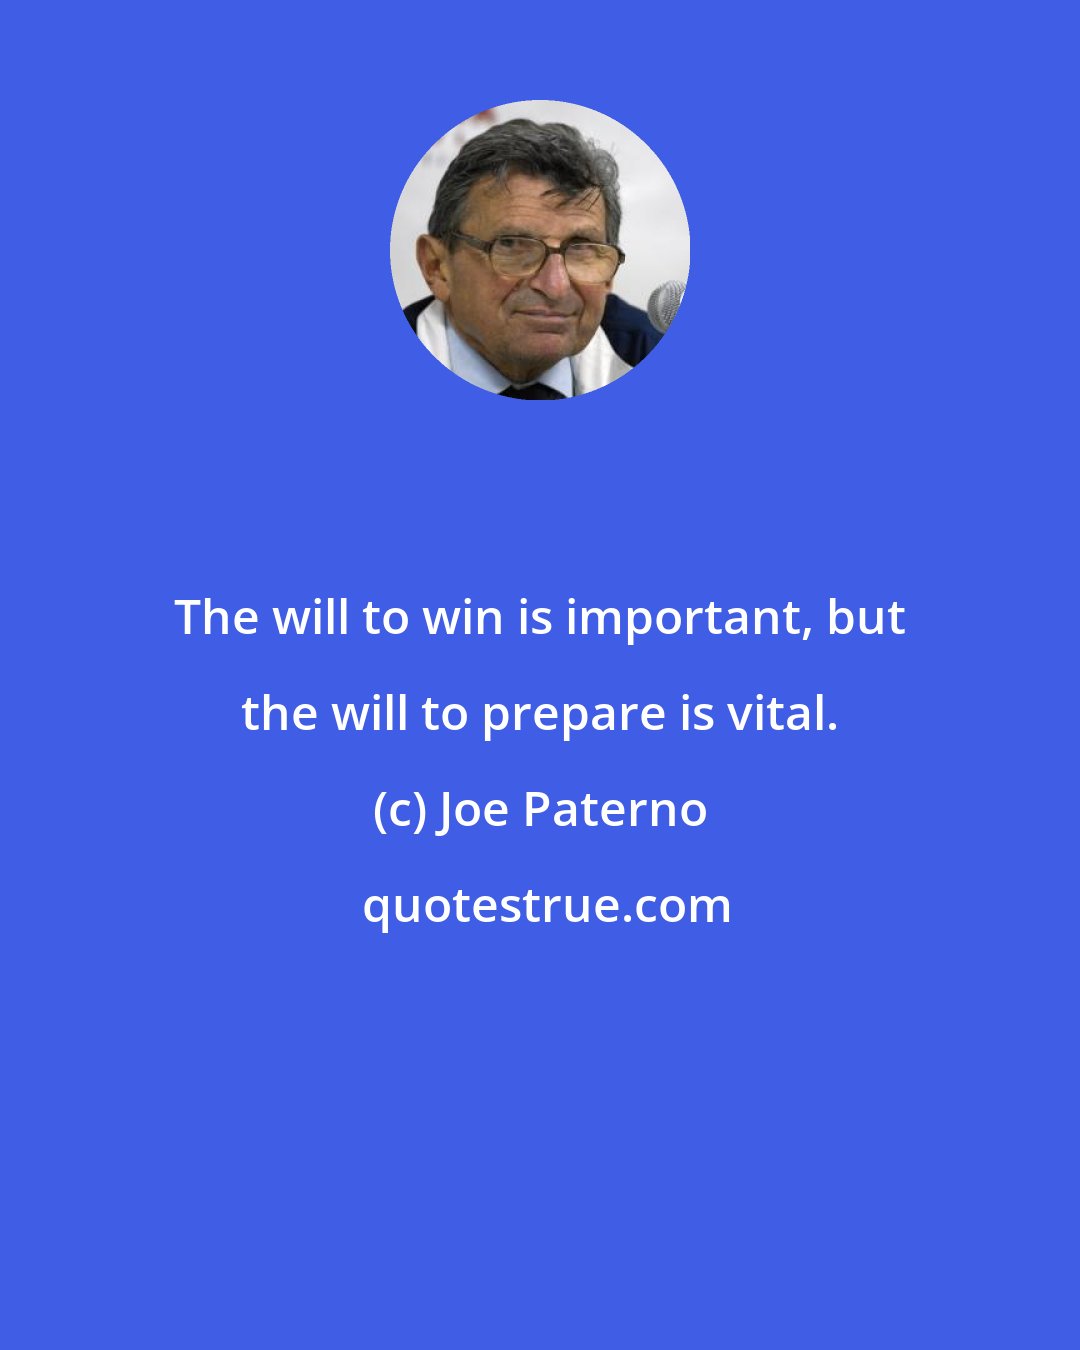 Joe Paterno: The will to win is important, but the will to prepare is vital.